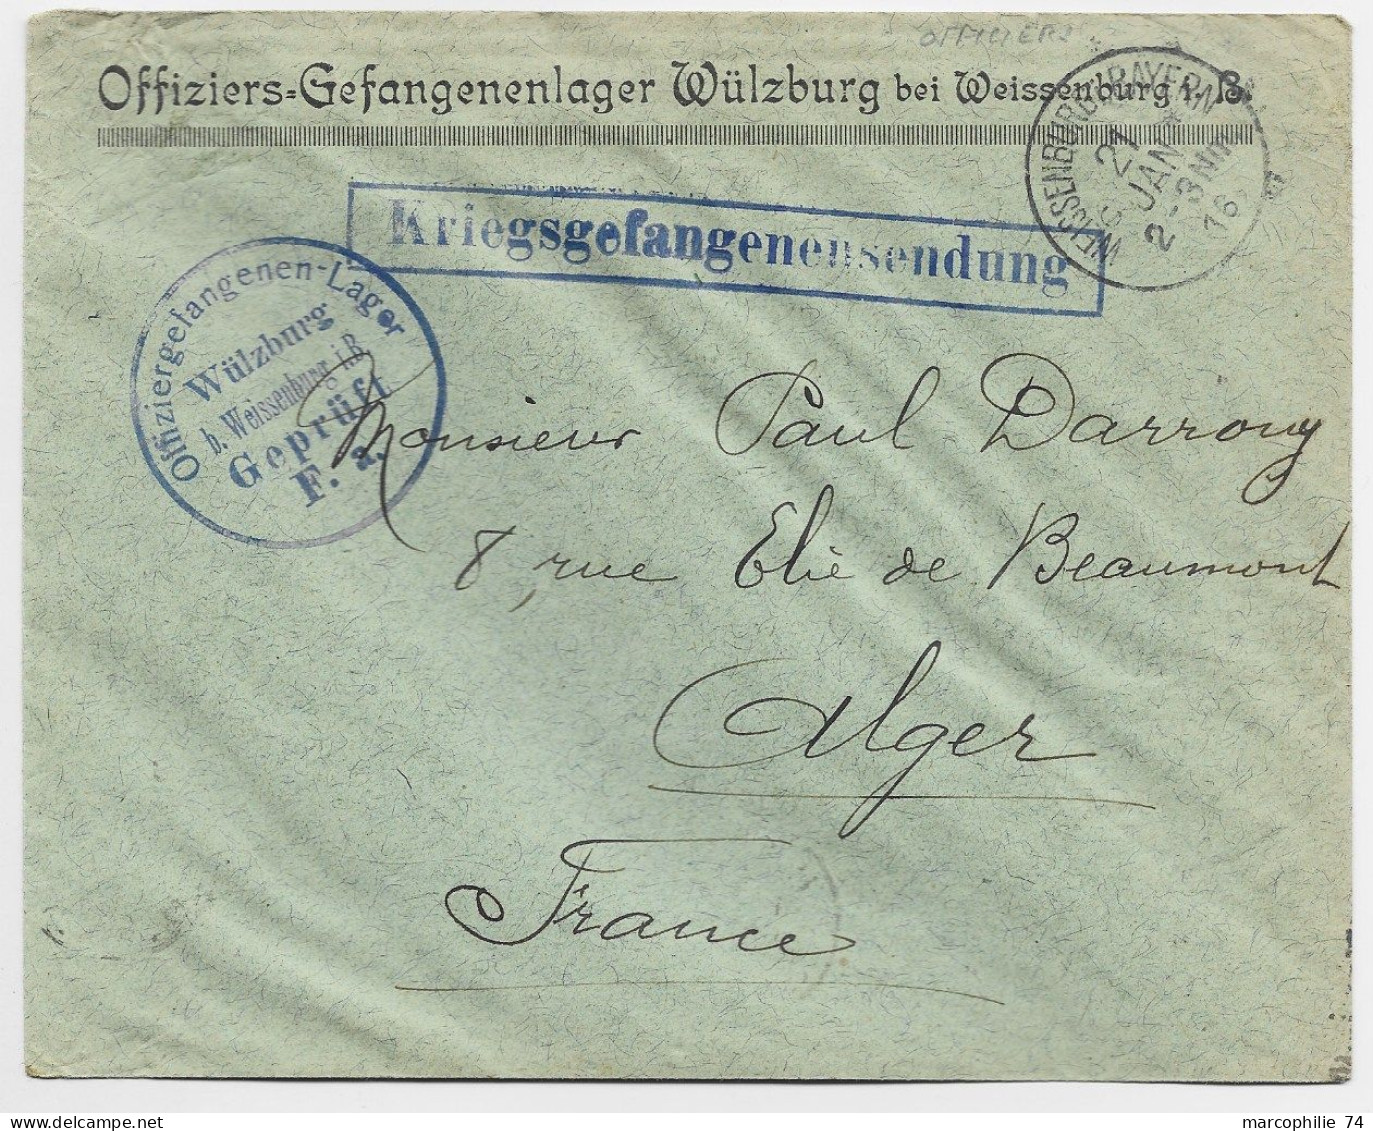 GERMANY LETTRE ENTETE BRIEF OFFIZIERS GEFANGENANLAGER WULZBURG 1916 GEPRUFT  TO ALGERIE - Covers & Documents